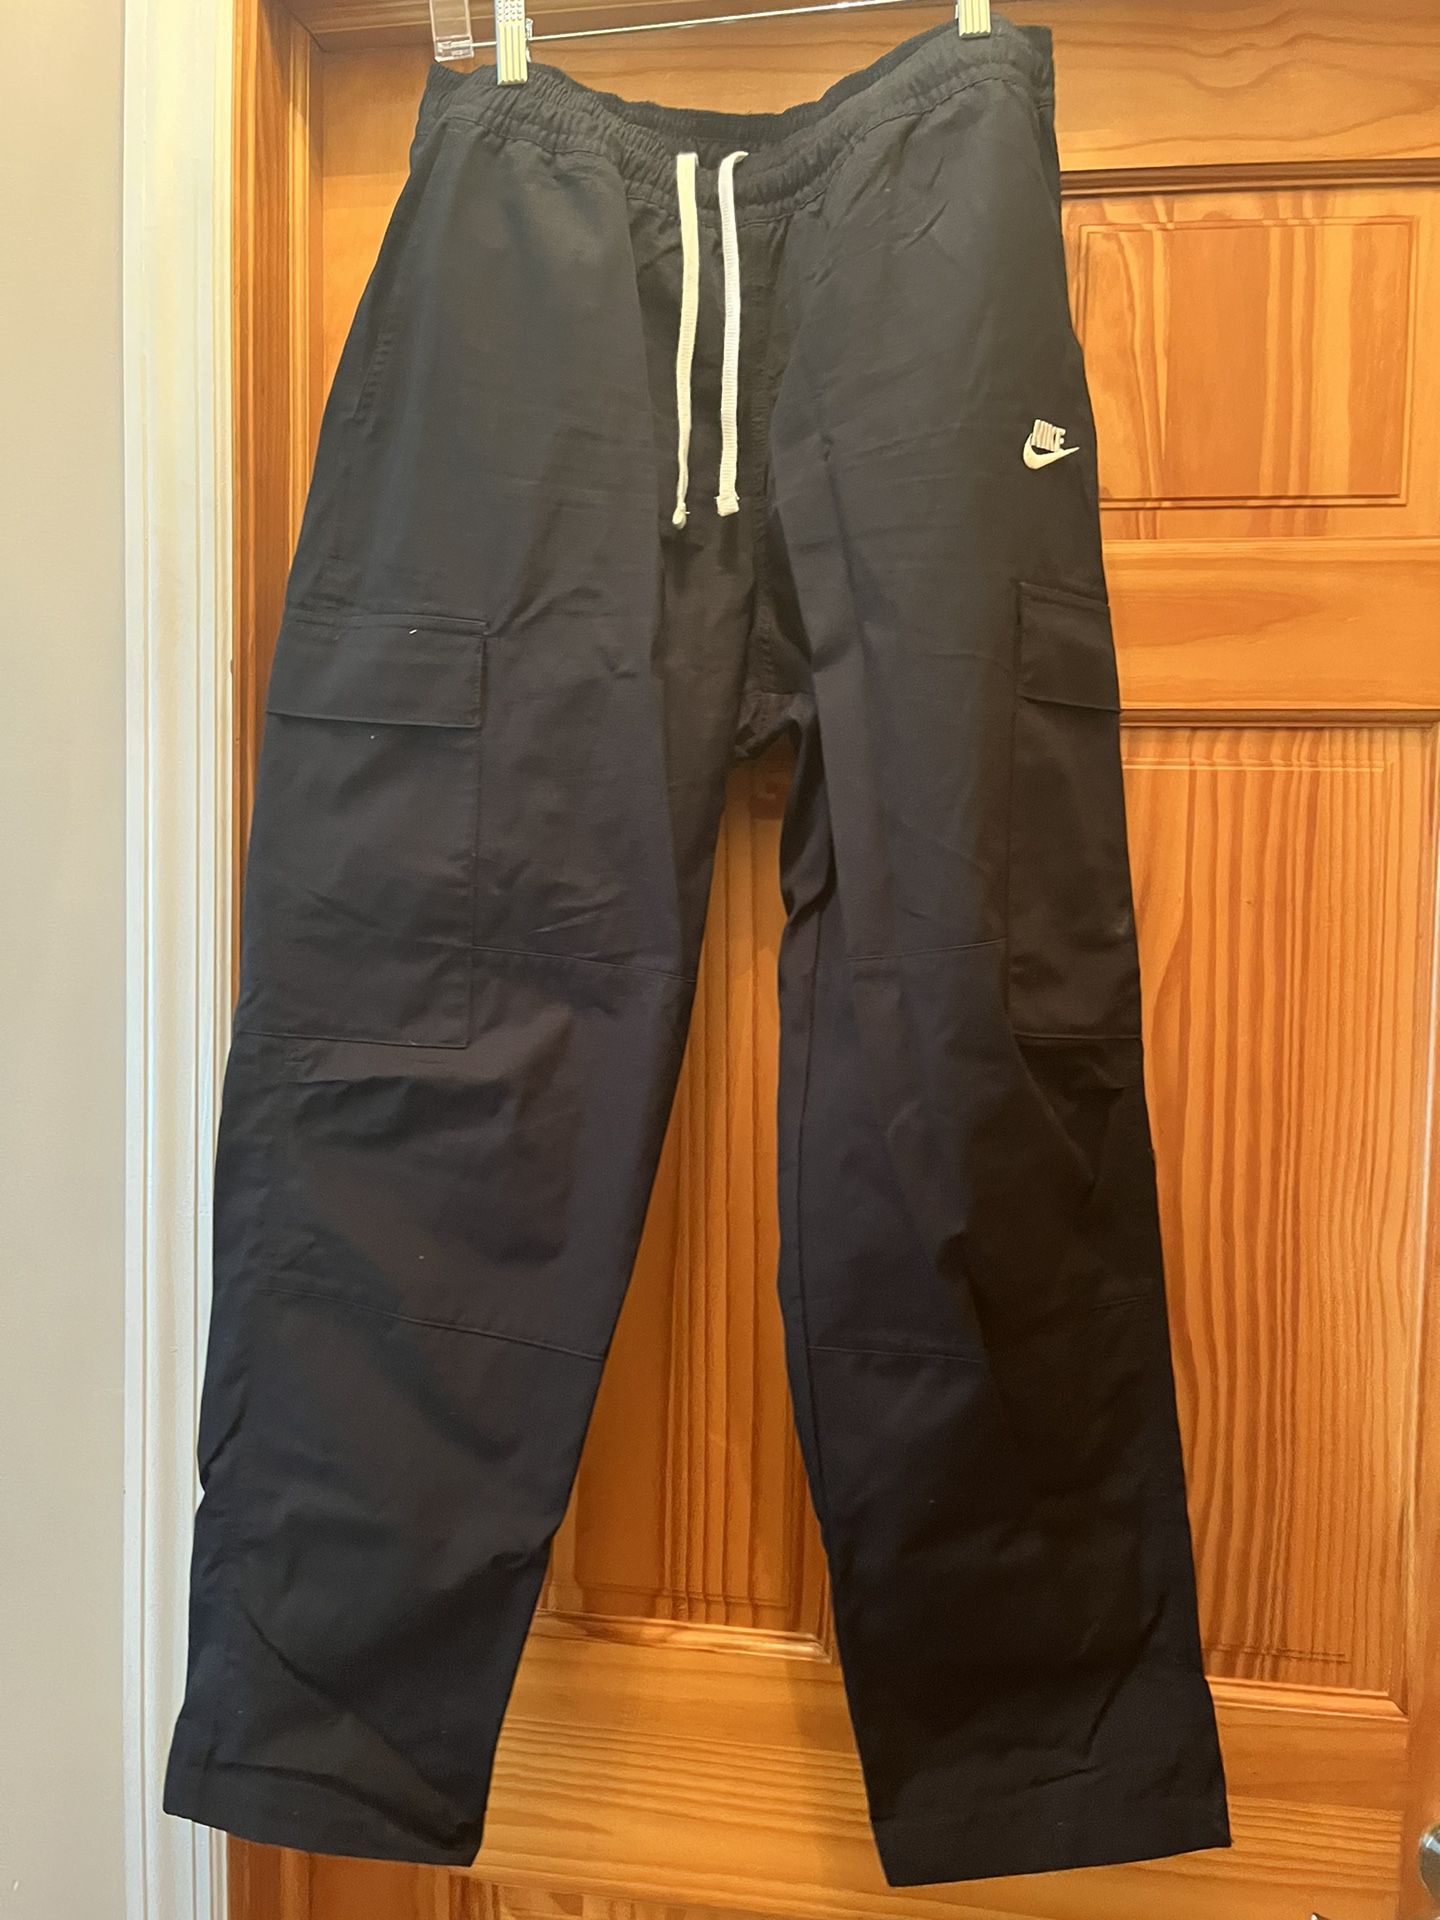 Nike men’s cargo pants. Color black. Size medium. Length from top to bottom is 40 inches. Lots of pockets